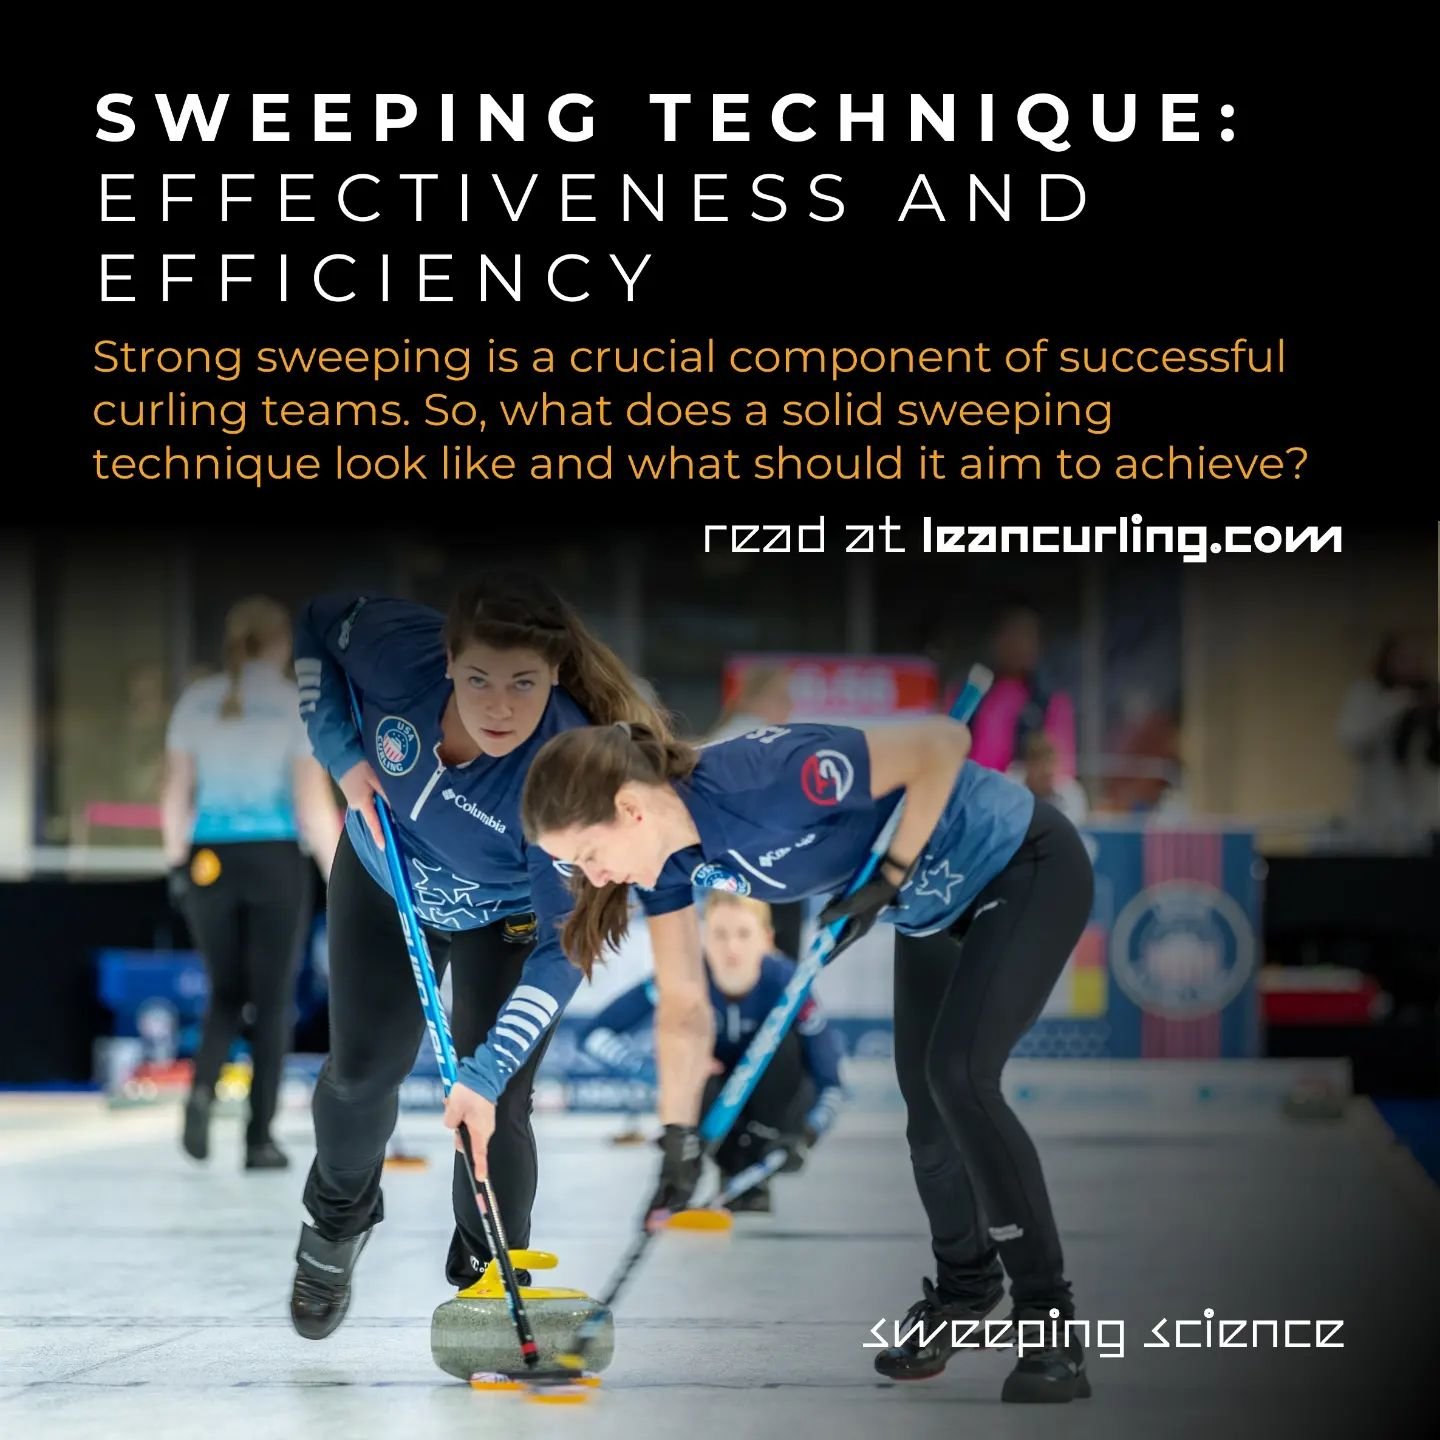 🧹 Sweeping is a huge part of curling. Teams who sweep better win more games. So, what should a great sweeping technique look like and achieve?

💯 Achieving sweeping effectiveness and efficiency should be the goal when developing your sweeping techn